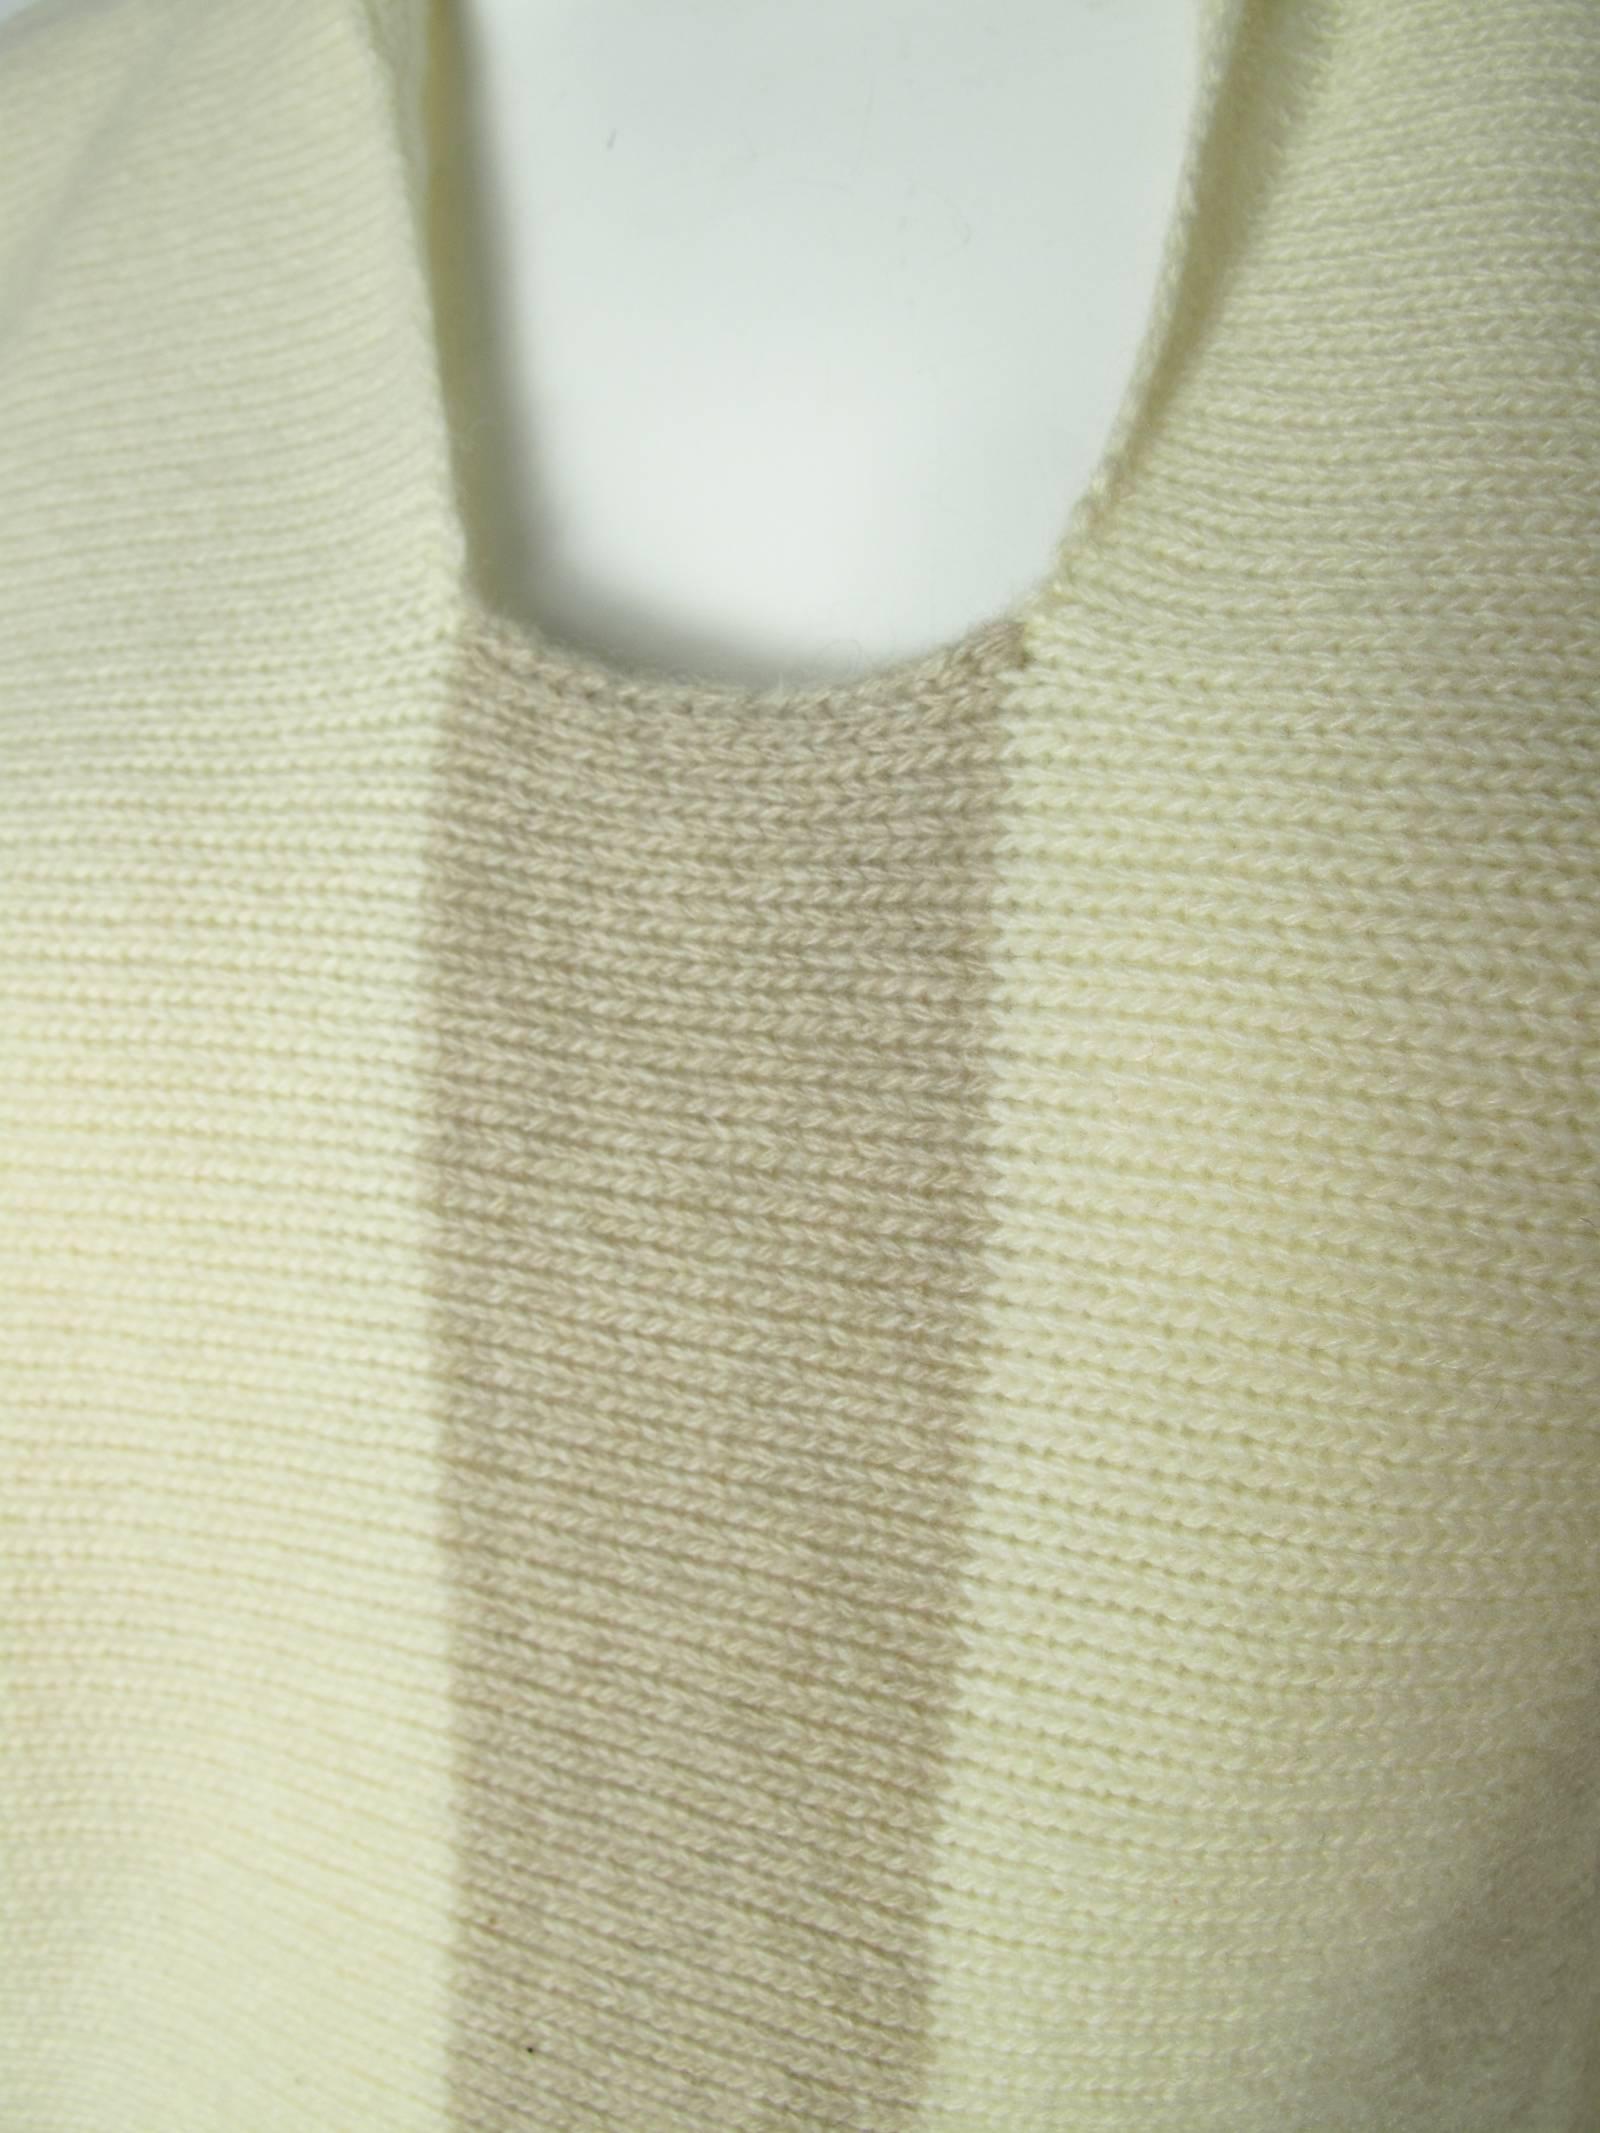 Chanel creme and beige cashmere sweater. Condition: Very good.  circa 1999. Size 40.  
We accept returns for refund, please see our terms.  We offer free ground shipping within the US.  Please let us know if you have any questions. 